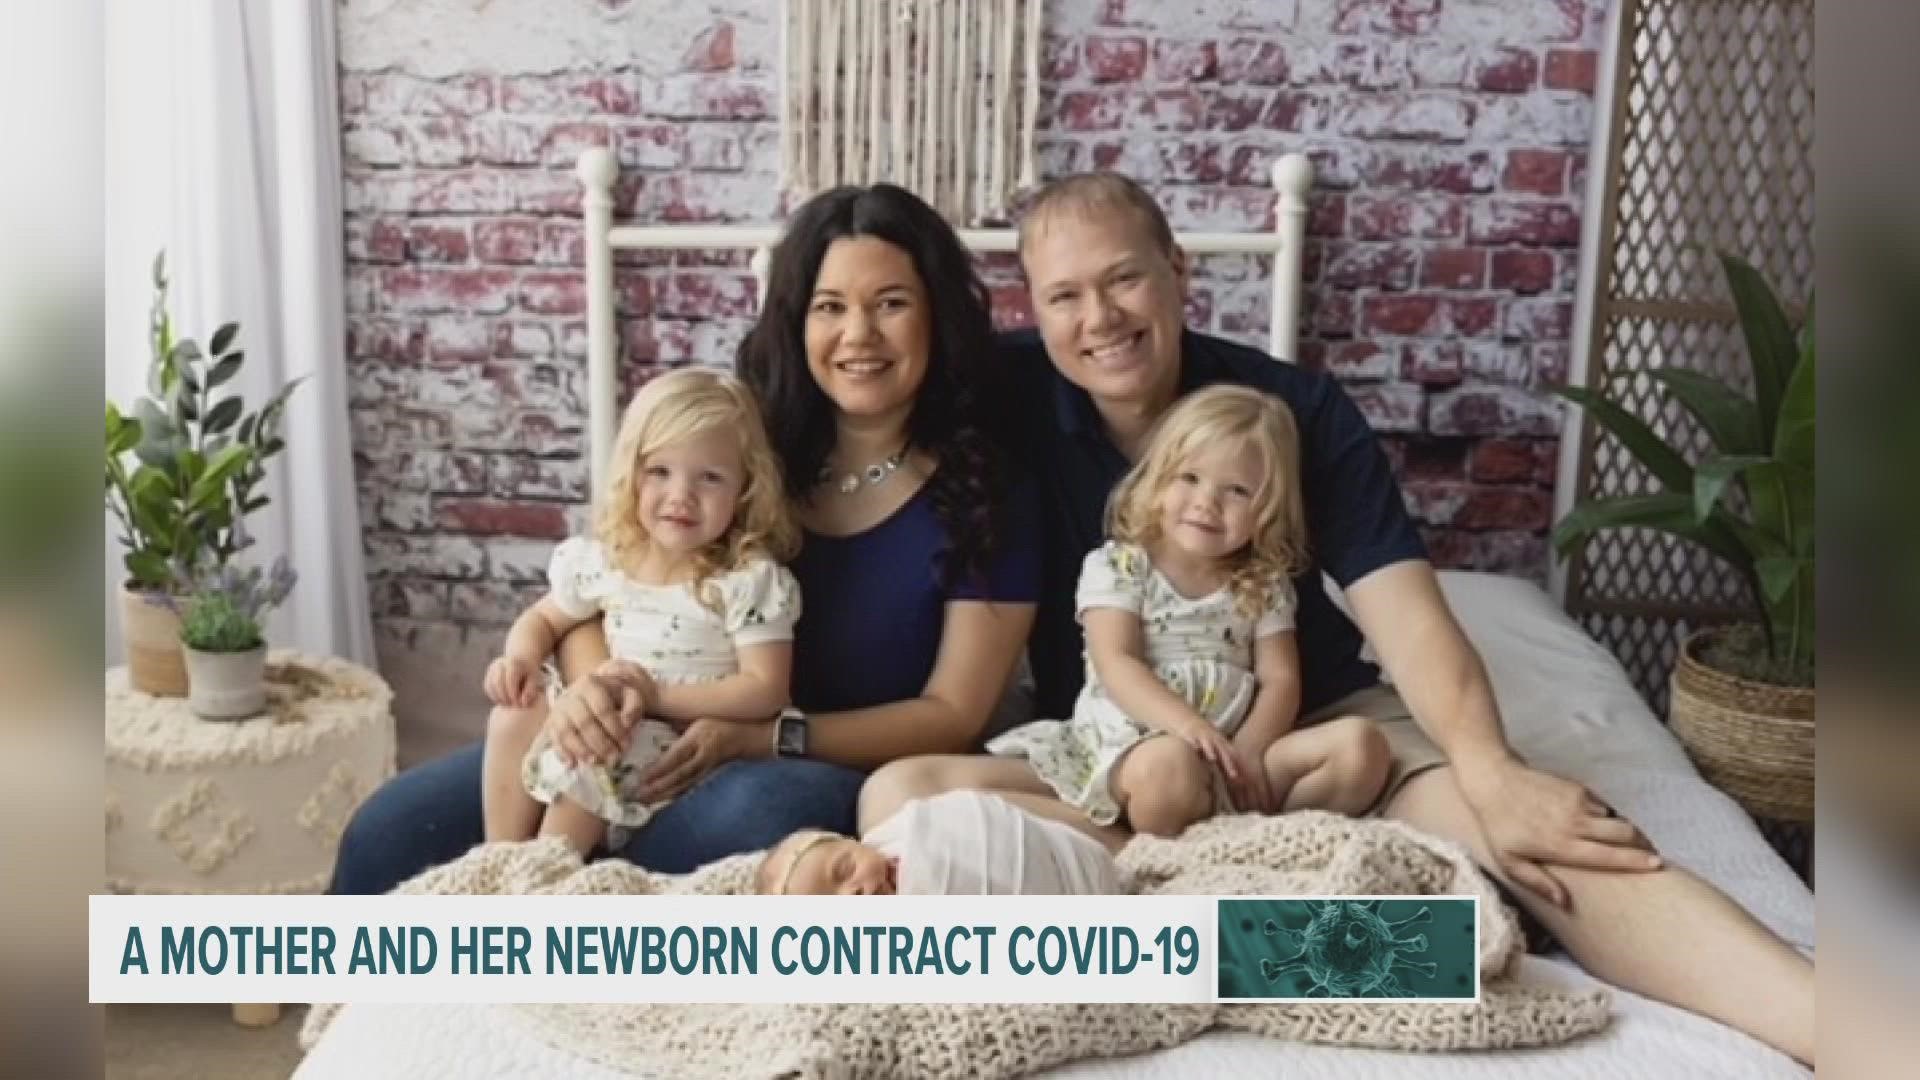 Rebecca Backstrom says there were moments during her fight with COVID-19 when she couldn't care for her kids, including newborn Willow, due to her own health issues.